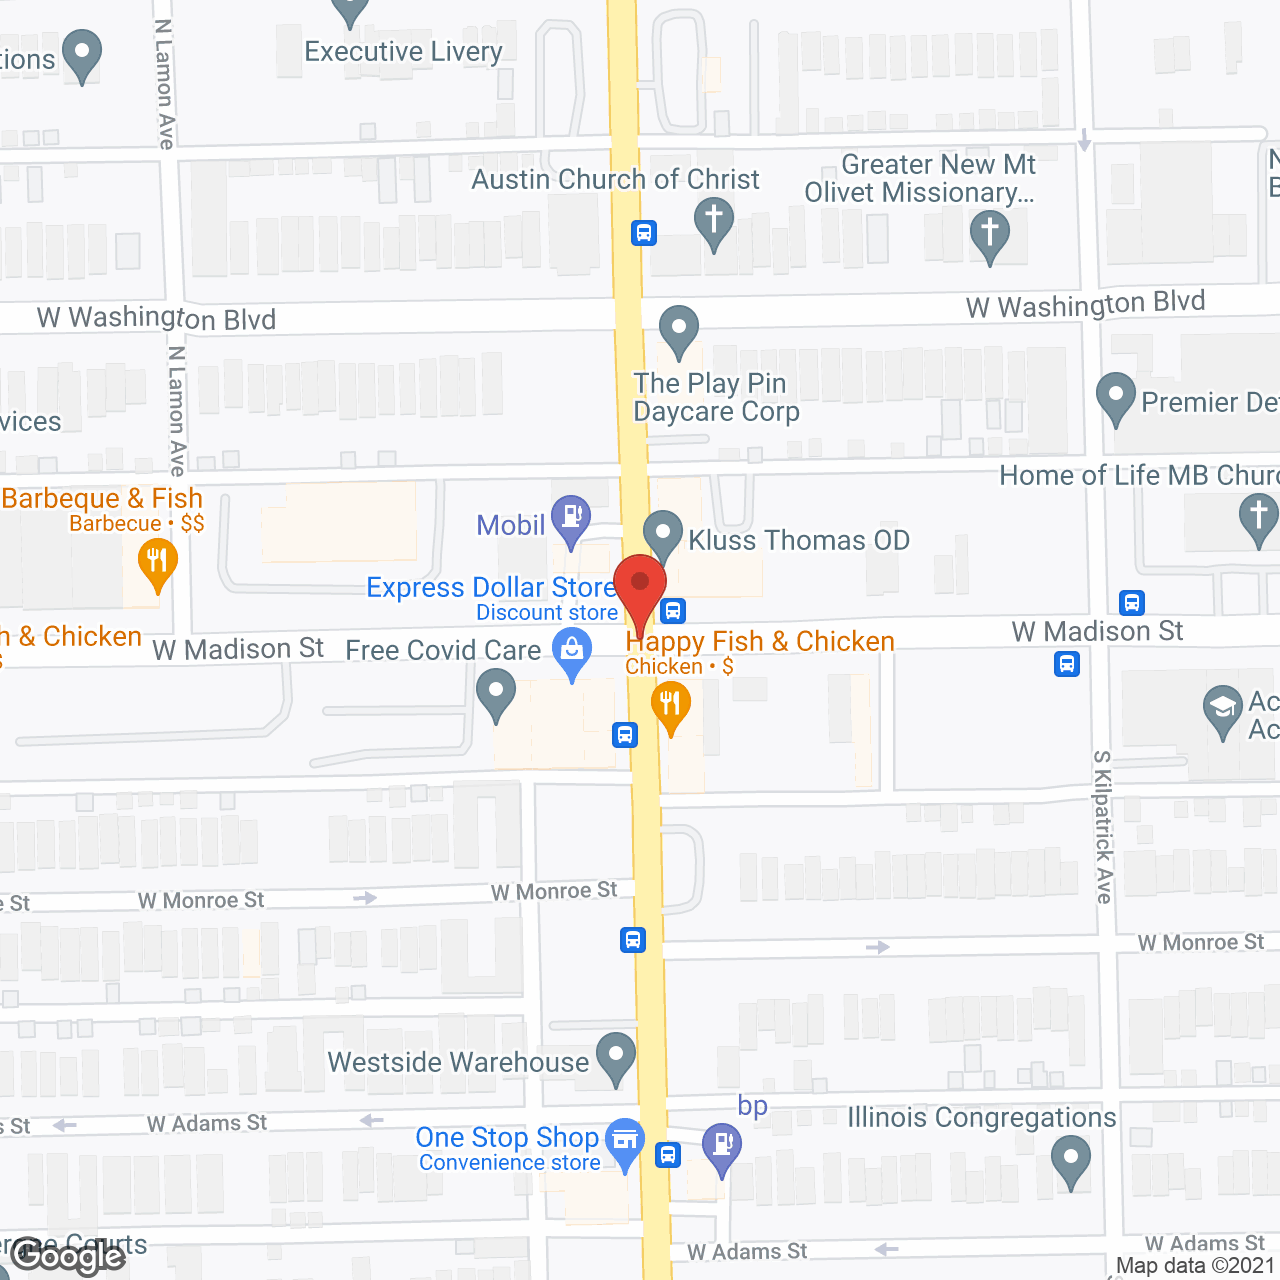 Access Home Care Corp in google map